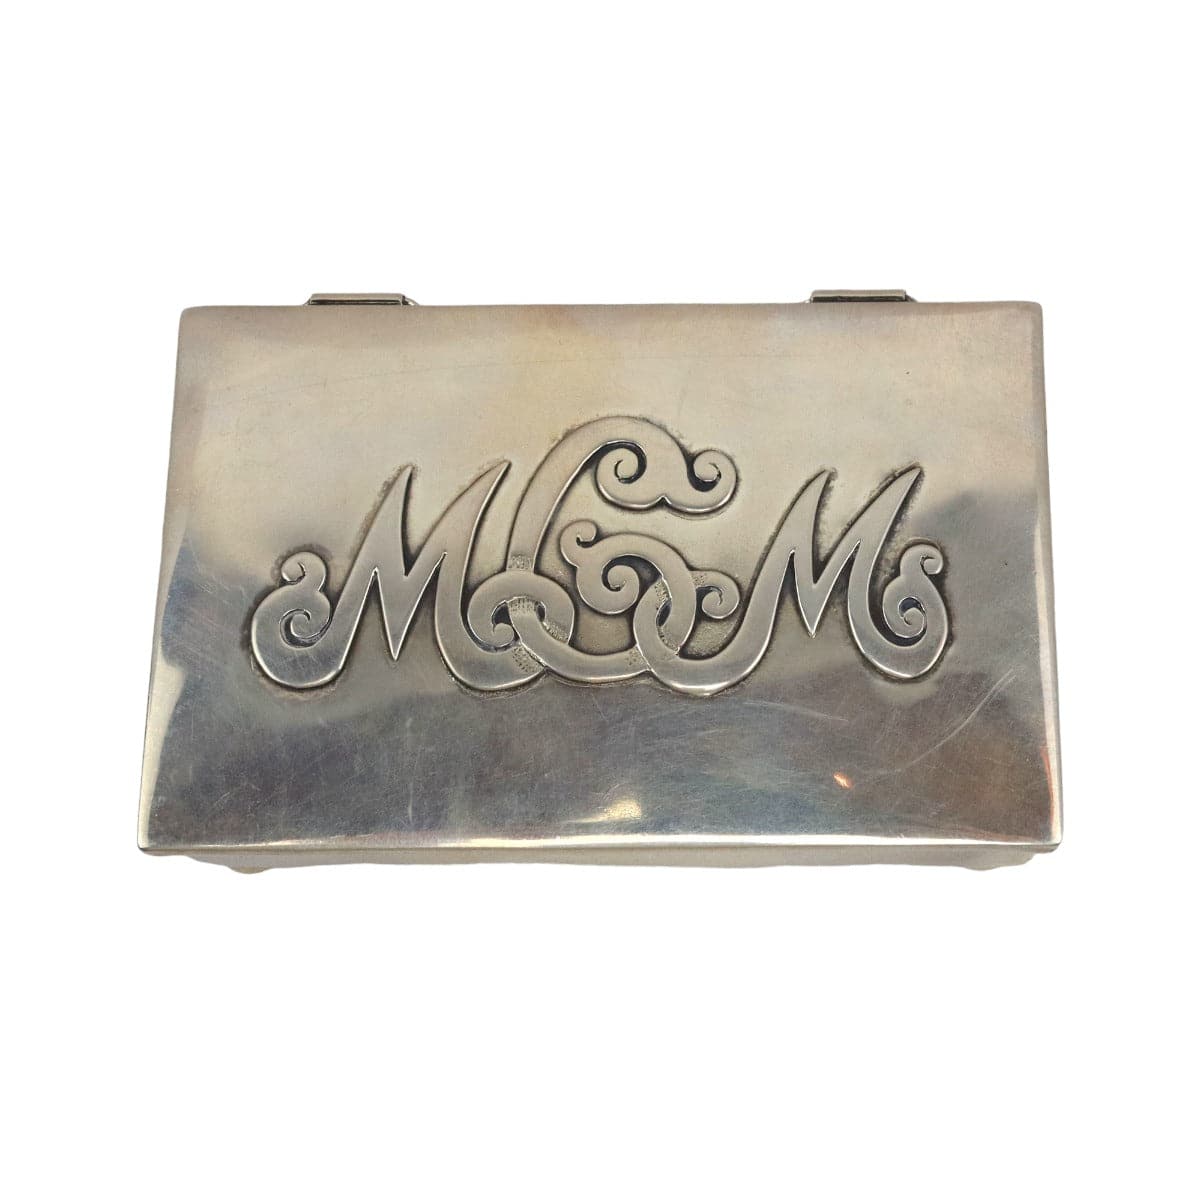 Frank Patania Sr. (1898-1964) - Sterling Silver Lidded Box with "MCM" Initials c. 1950s, 1.5" x 5.5" x 3.75" (J91699-1022-014) 1